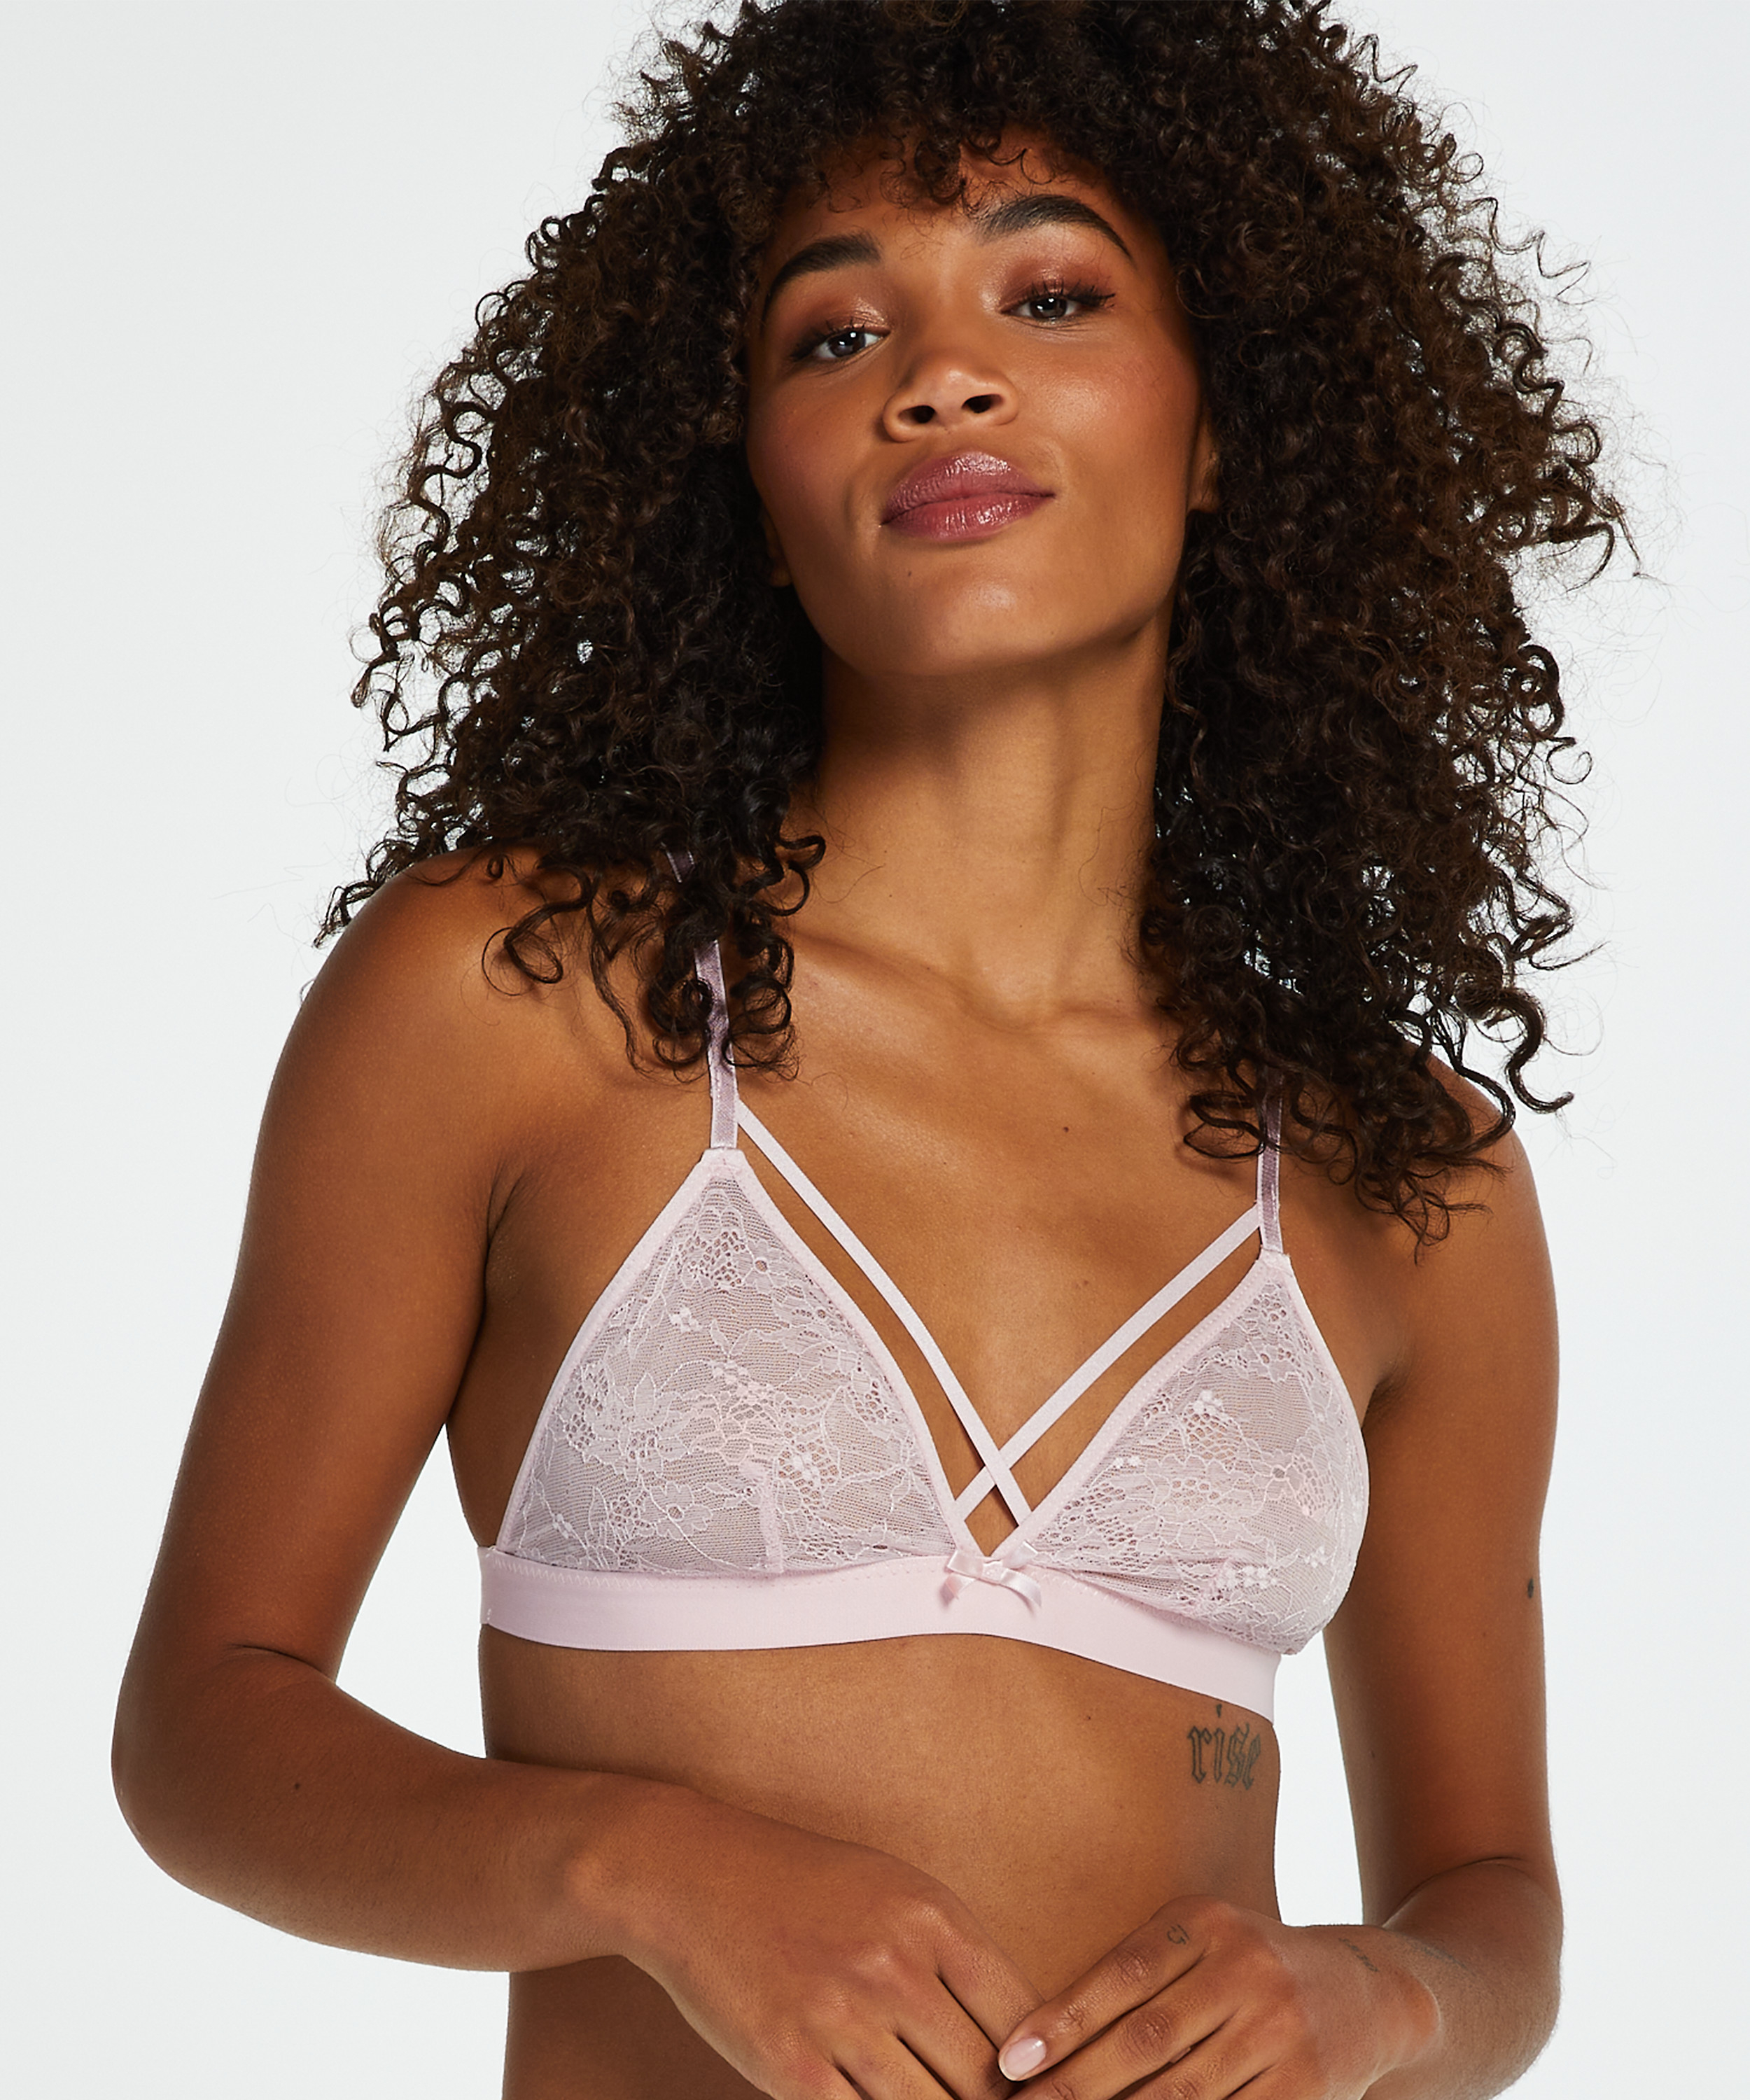 Corby Bralette, Pink, main